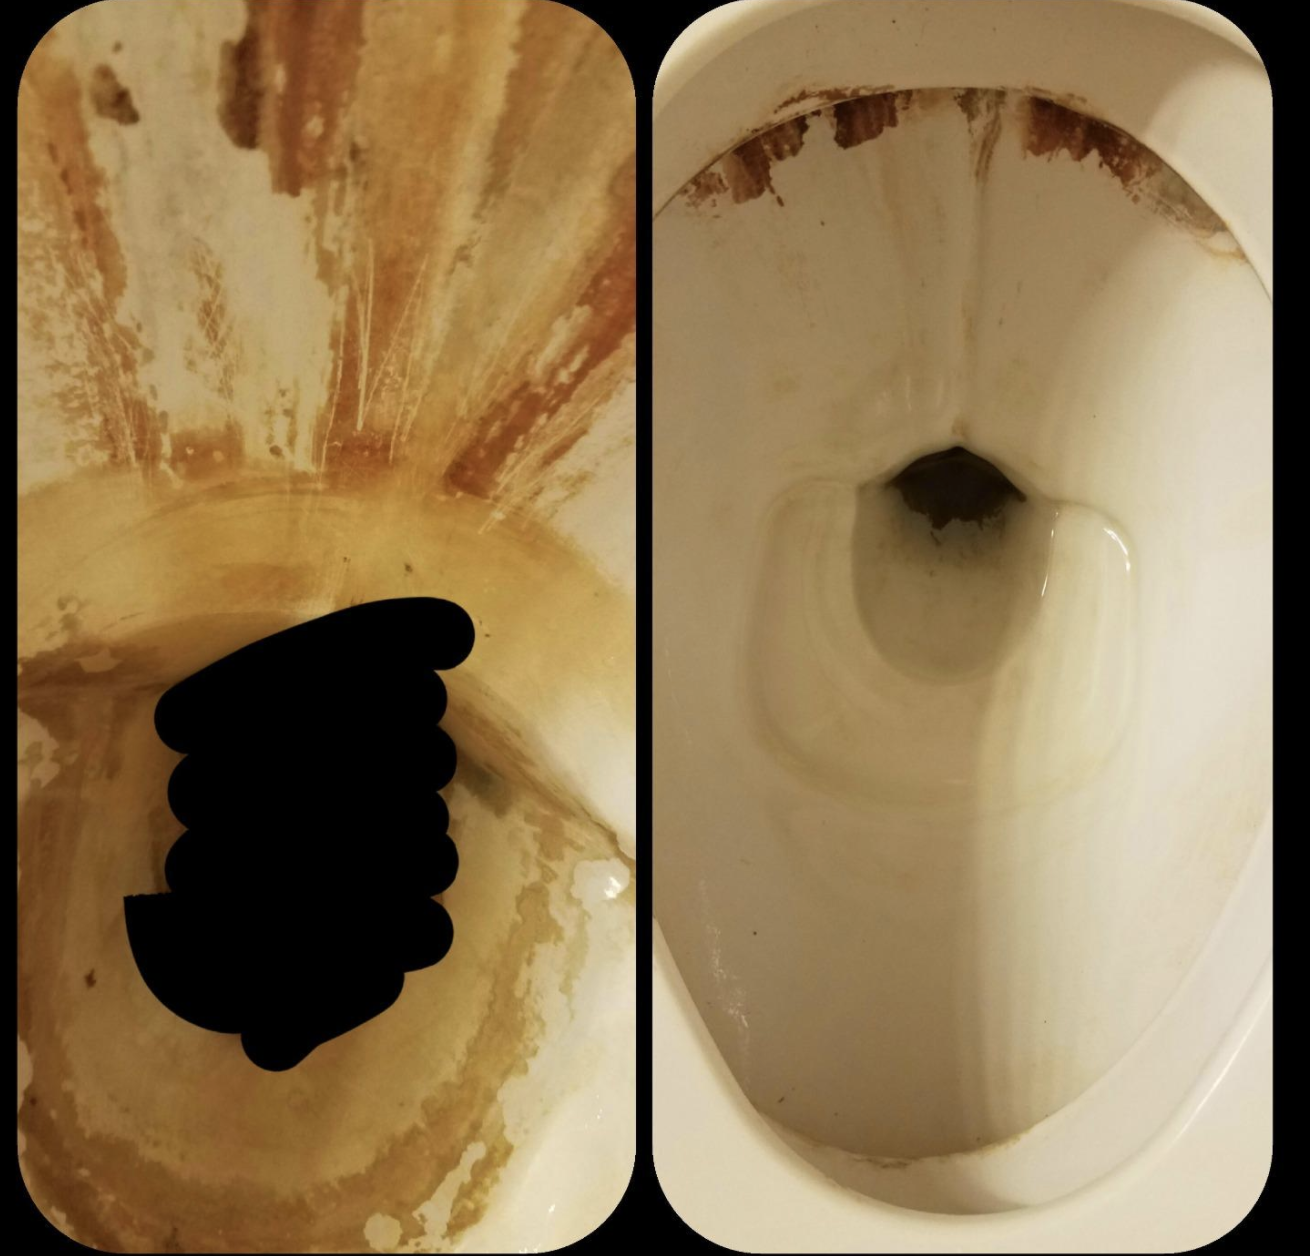 on the left, a reviewer&#x27;s toilet looking really gross and dirty, and on the right, the toilet is almost entirely clean